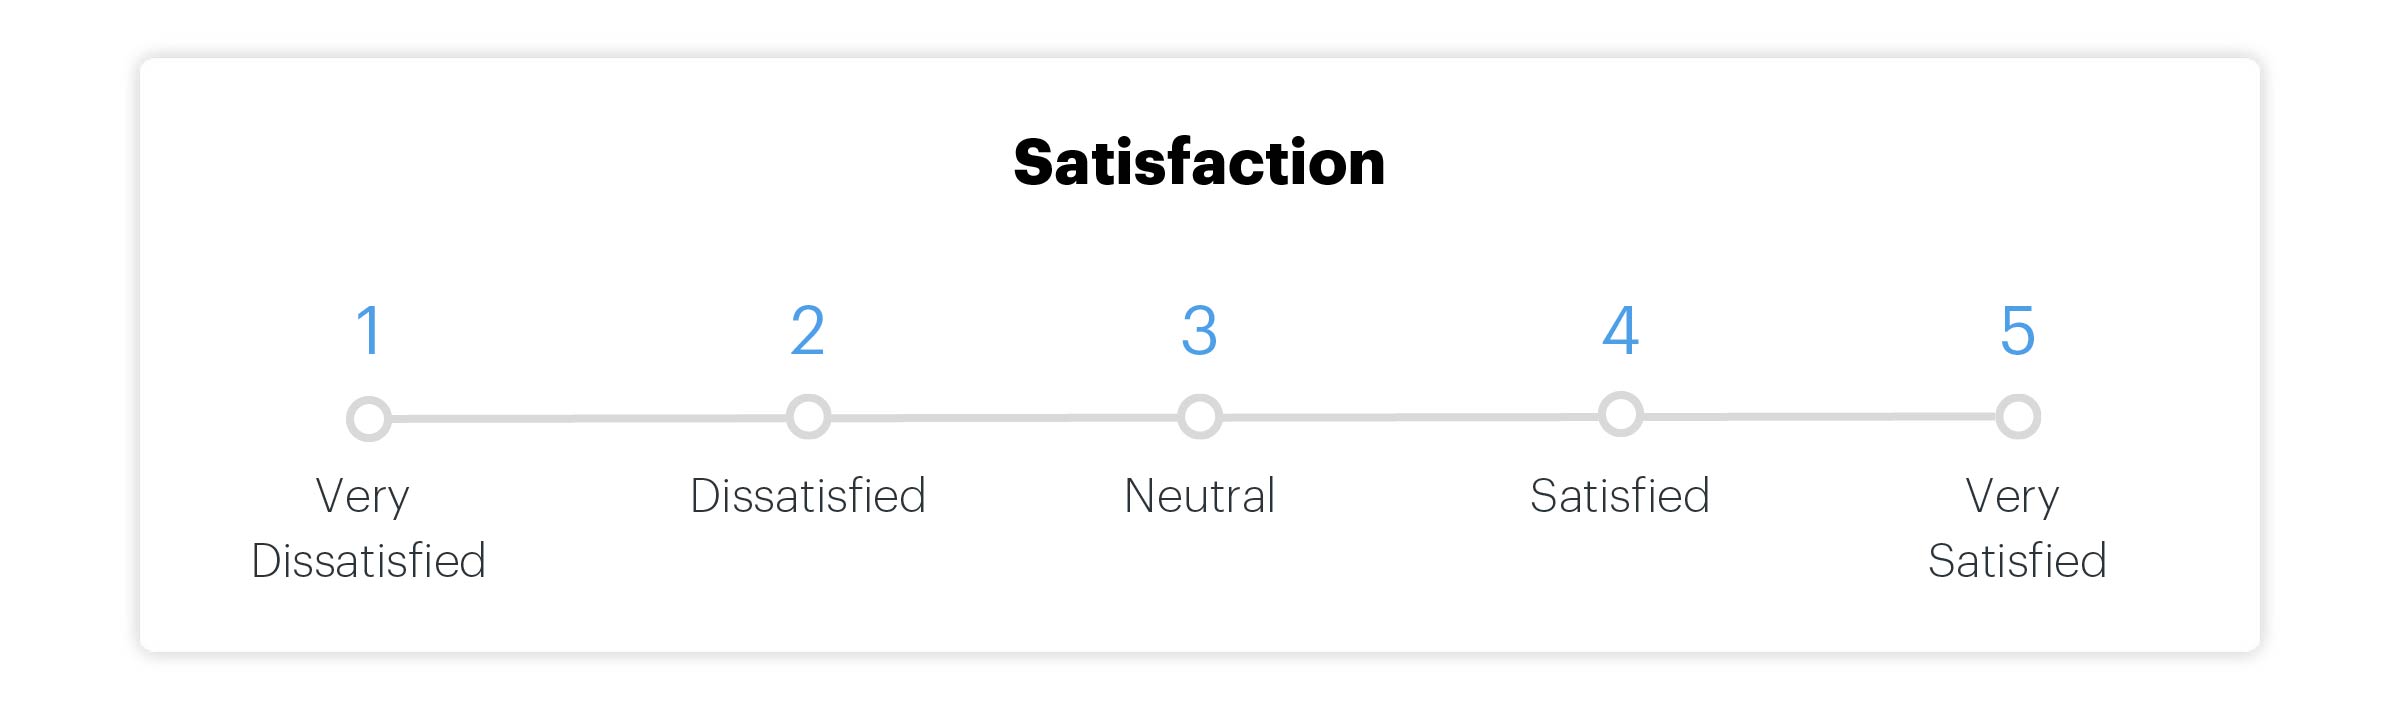 A Likert scale ranking satisfaction from one to five